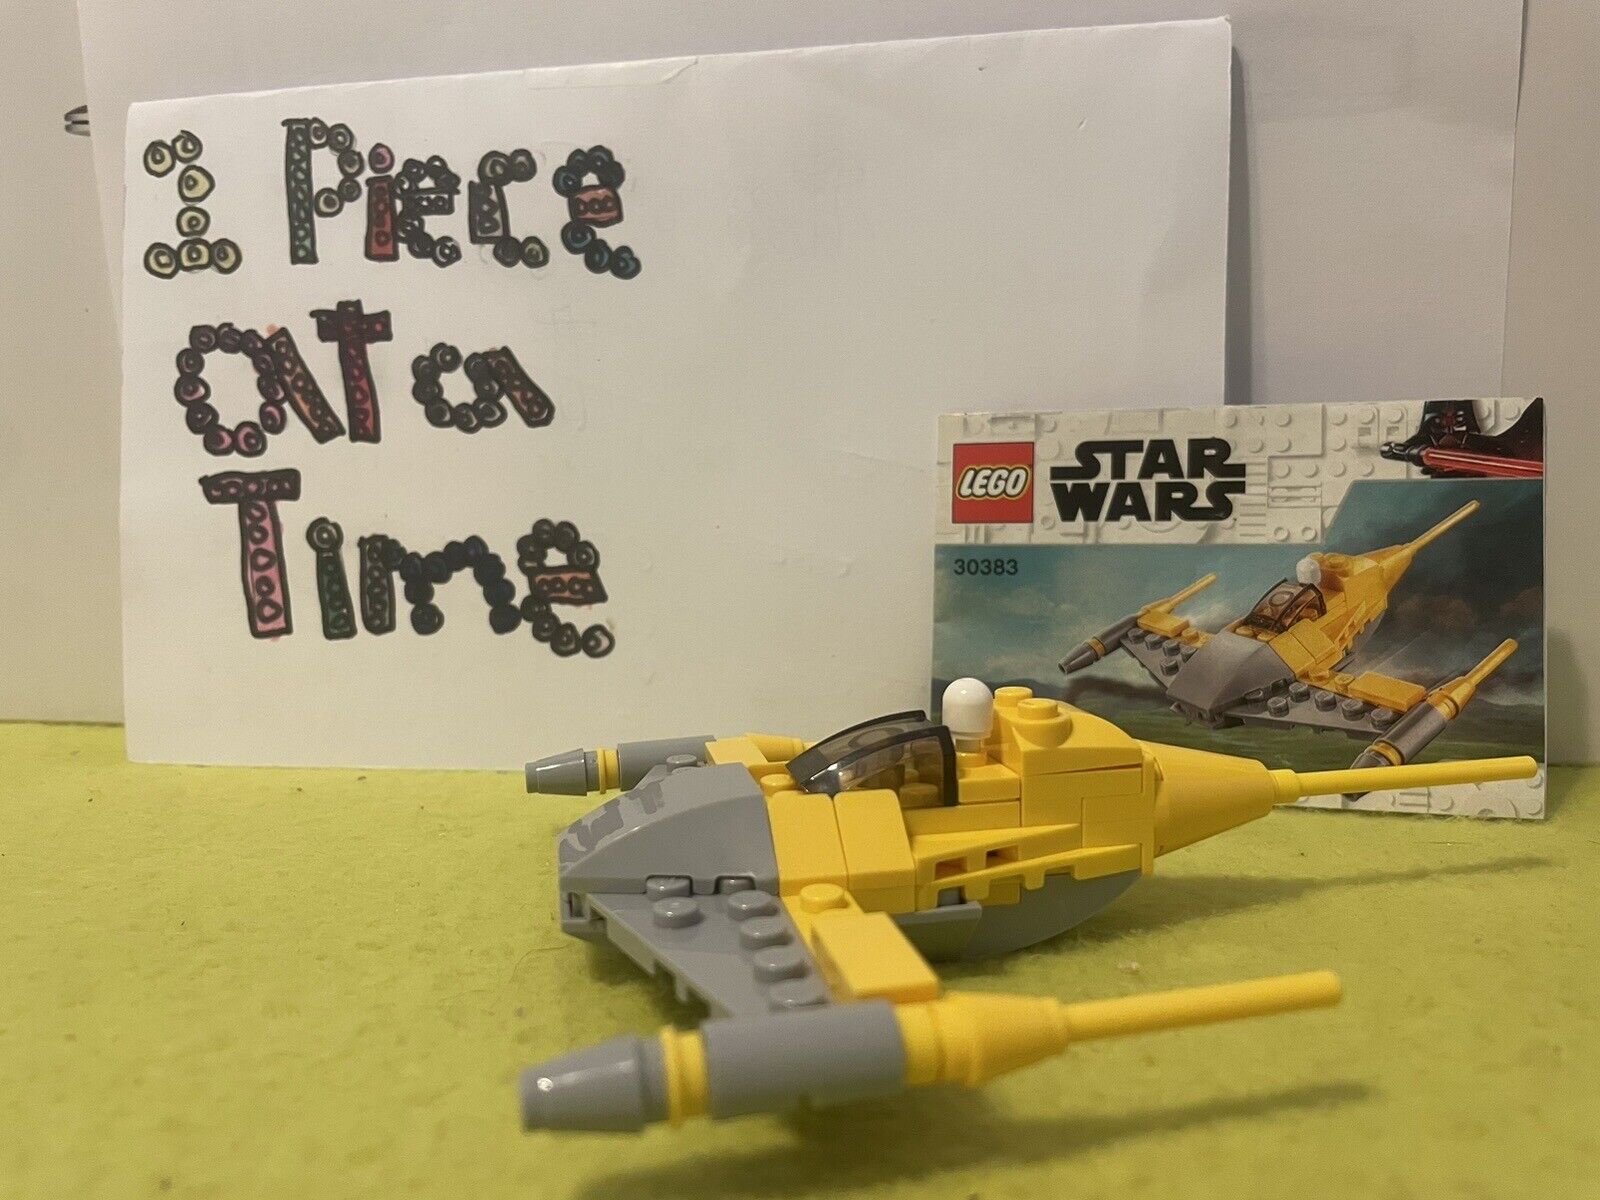 Lego Star Wars 30383 Naboo Starfighter Complete with Instructions RETIRED, used